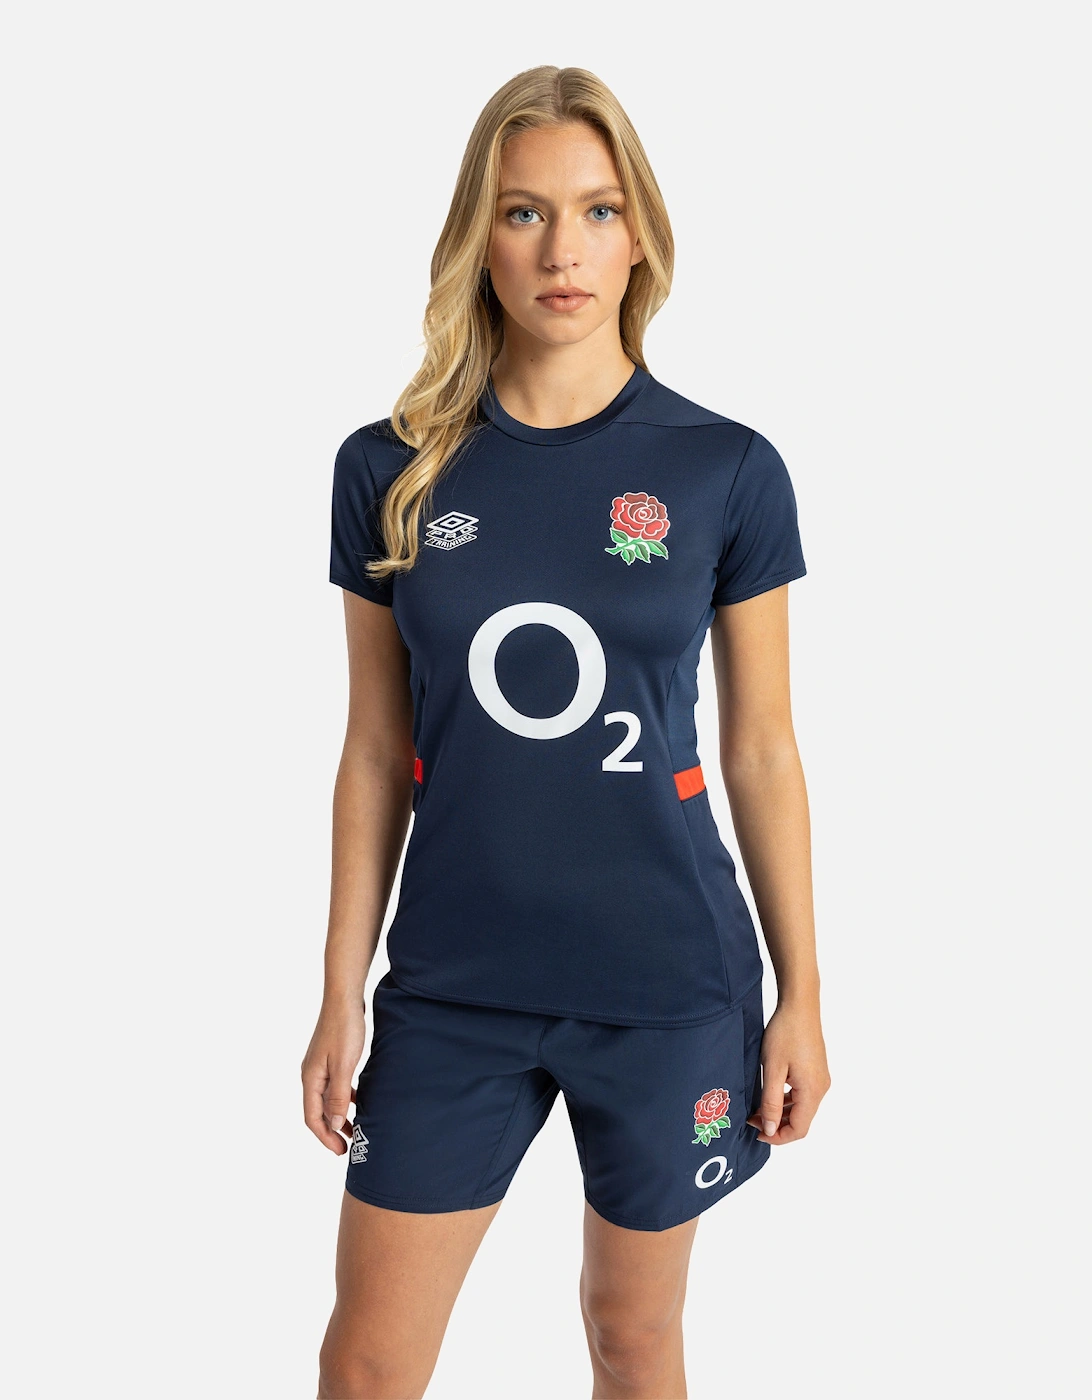 Womens/Ladies 23/24 England Rugby Gym T-Shirt